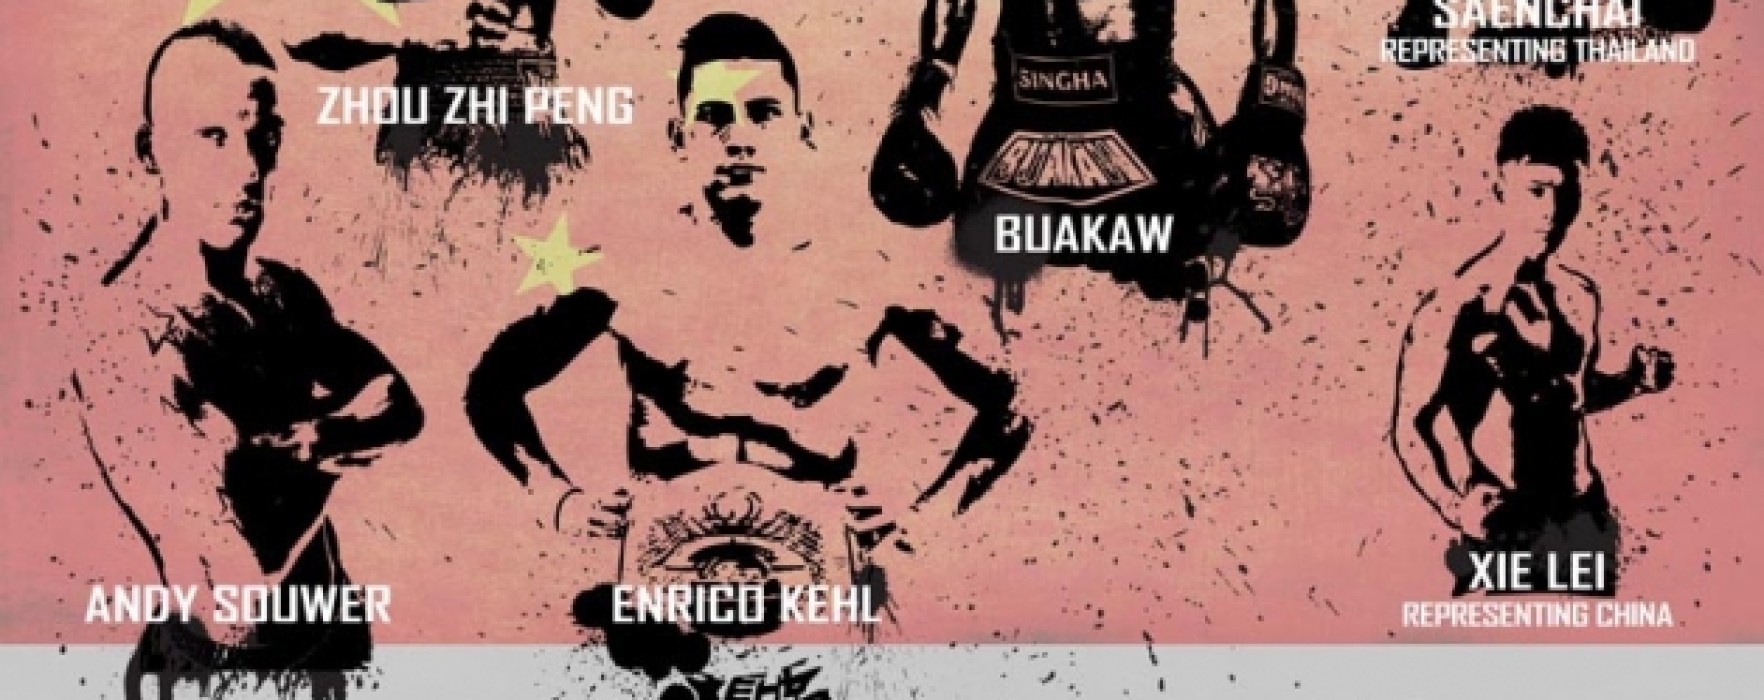 Results and video of Saenchai and Buakaw K-1 World Max 2013 Foshan